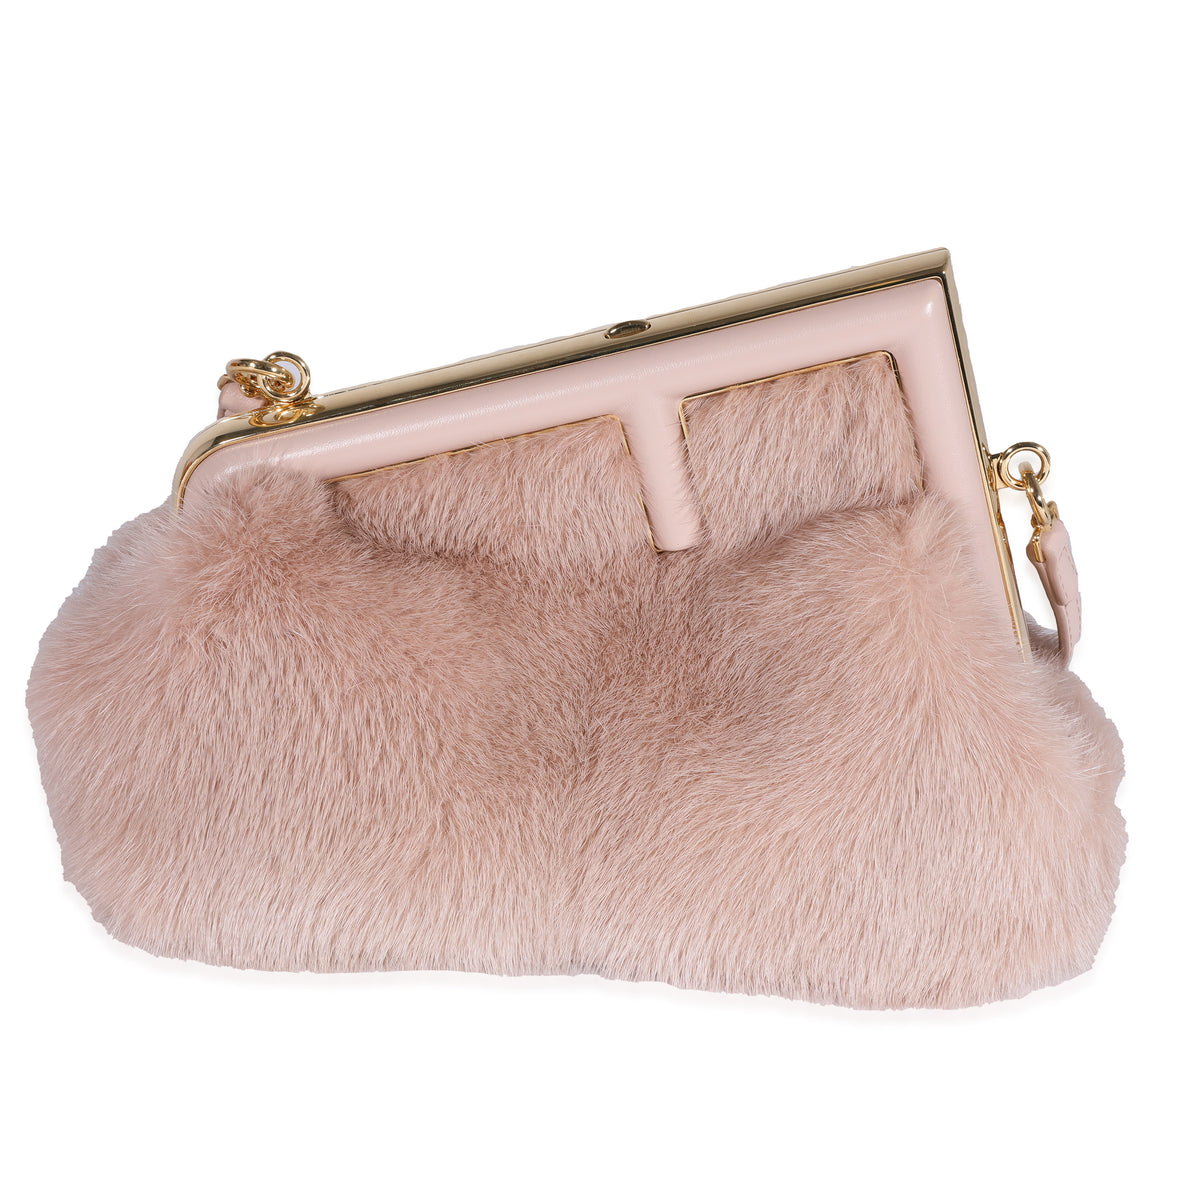 Blush Mink & Leather Small First Bag